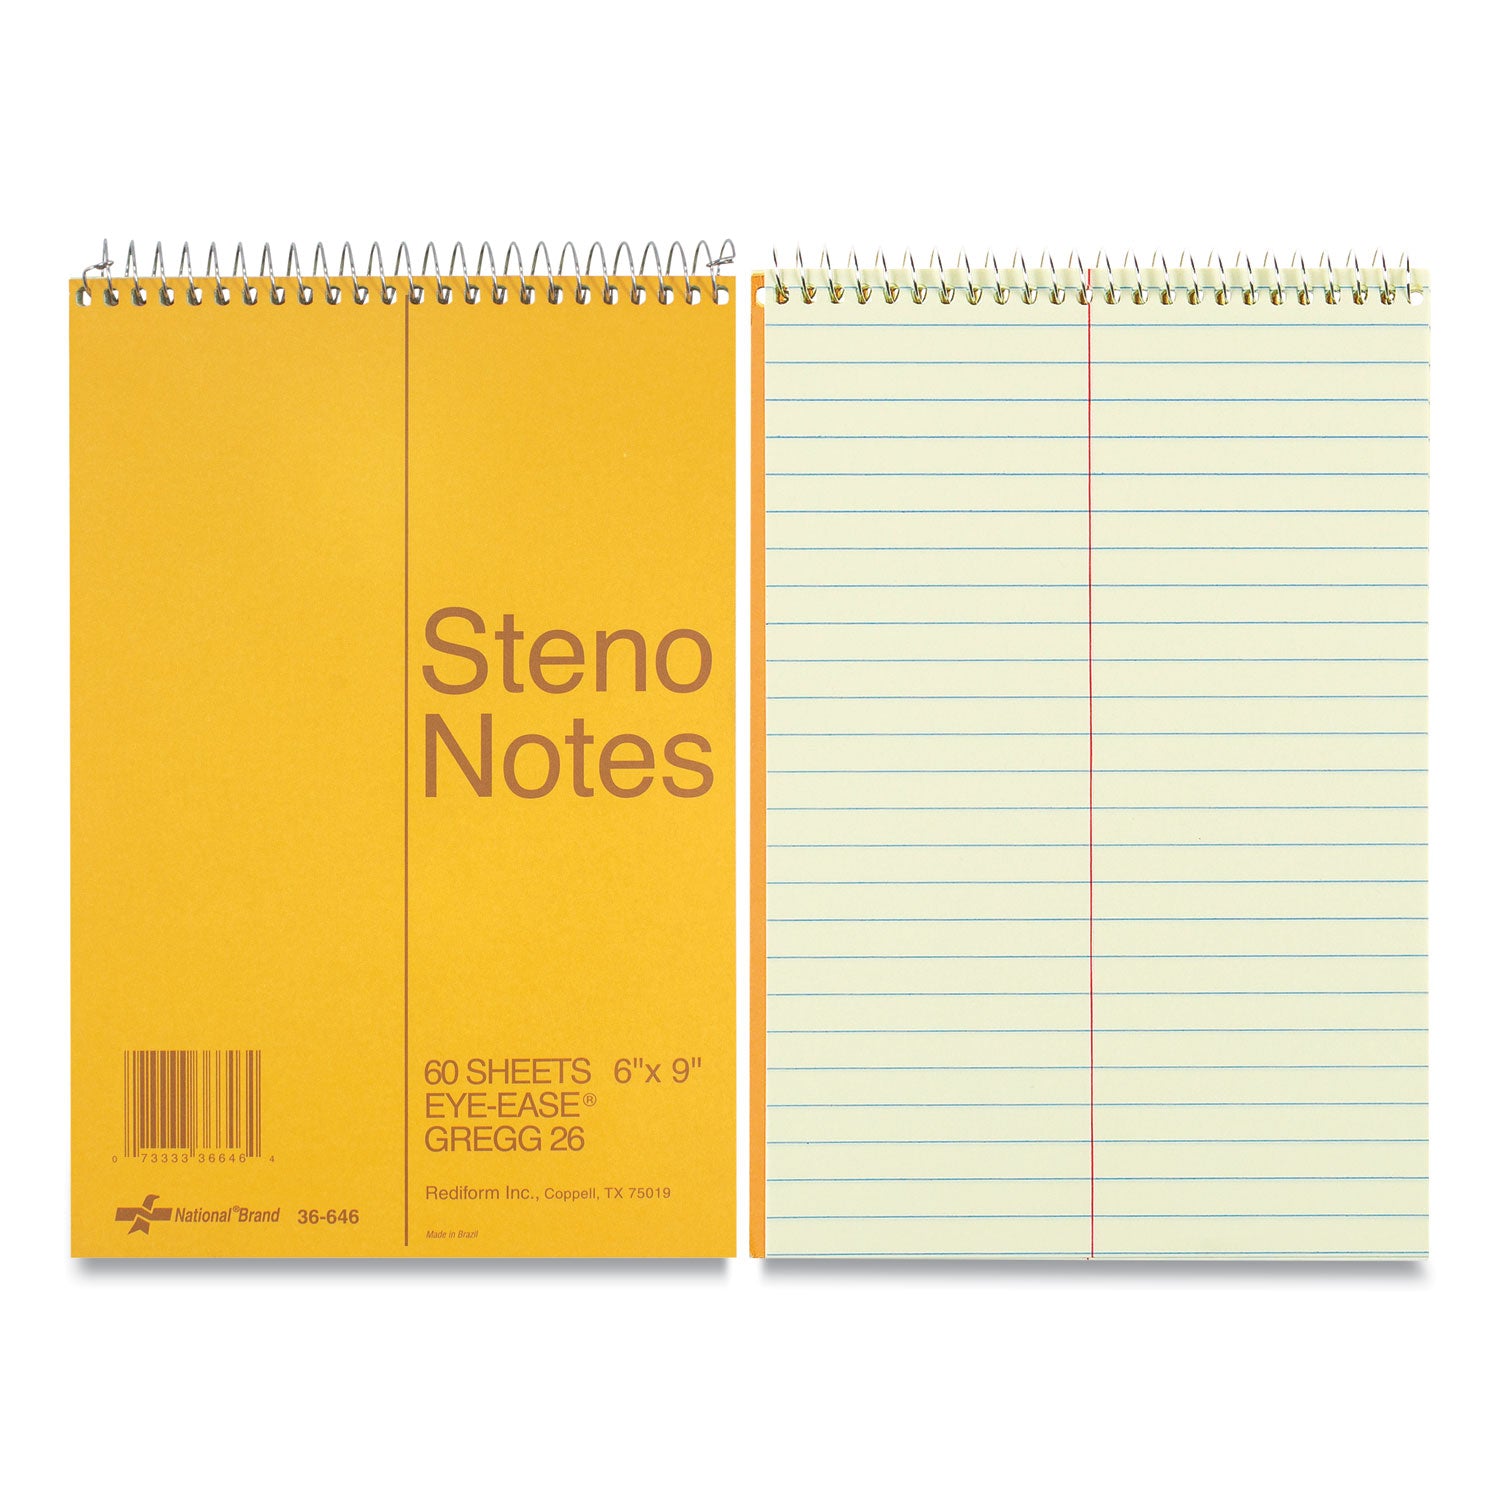 Standard Spiral Steno Pad, Gregg Rule, Brown Cover, 60 Eye-Ease Green 6 x 9 Sheets - 